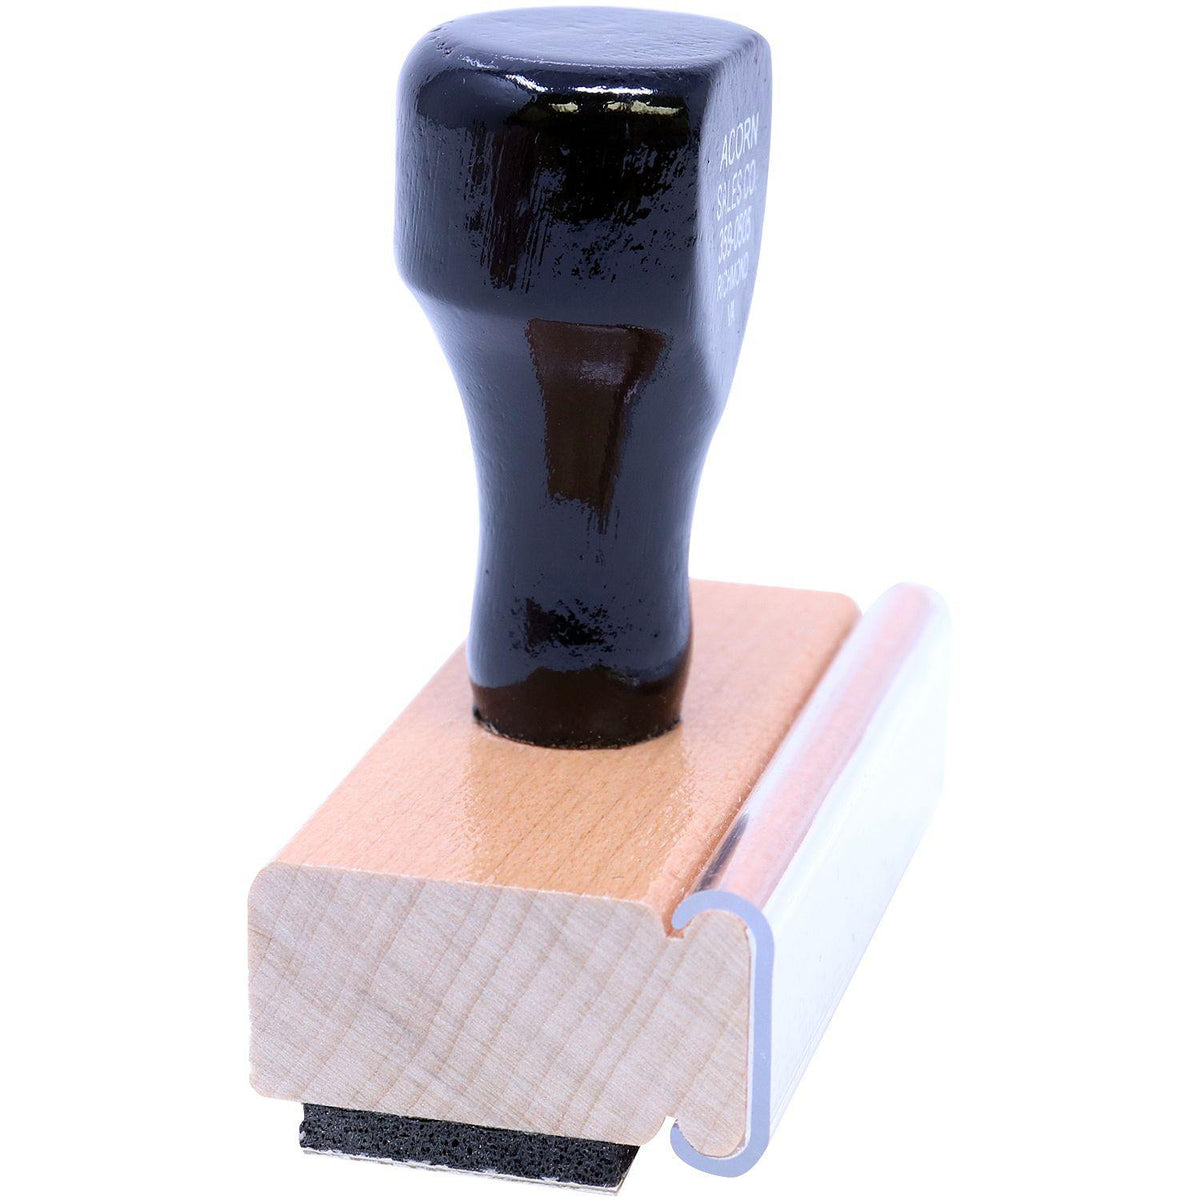 Preliminary As Built Rubber Stamp - Engineer Seal Stamps - Brand_Acorn, Impression Size_Small, Stamp Type_Regular Stamp, Type of Use_Legal